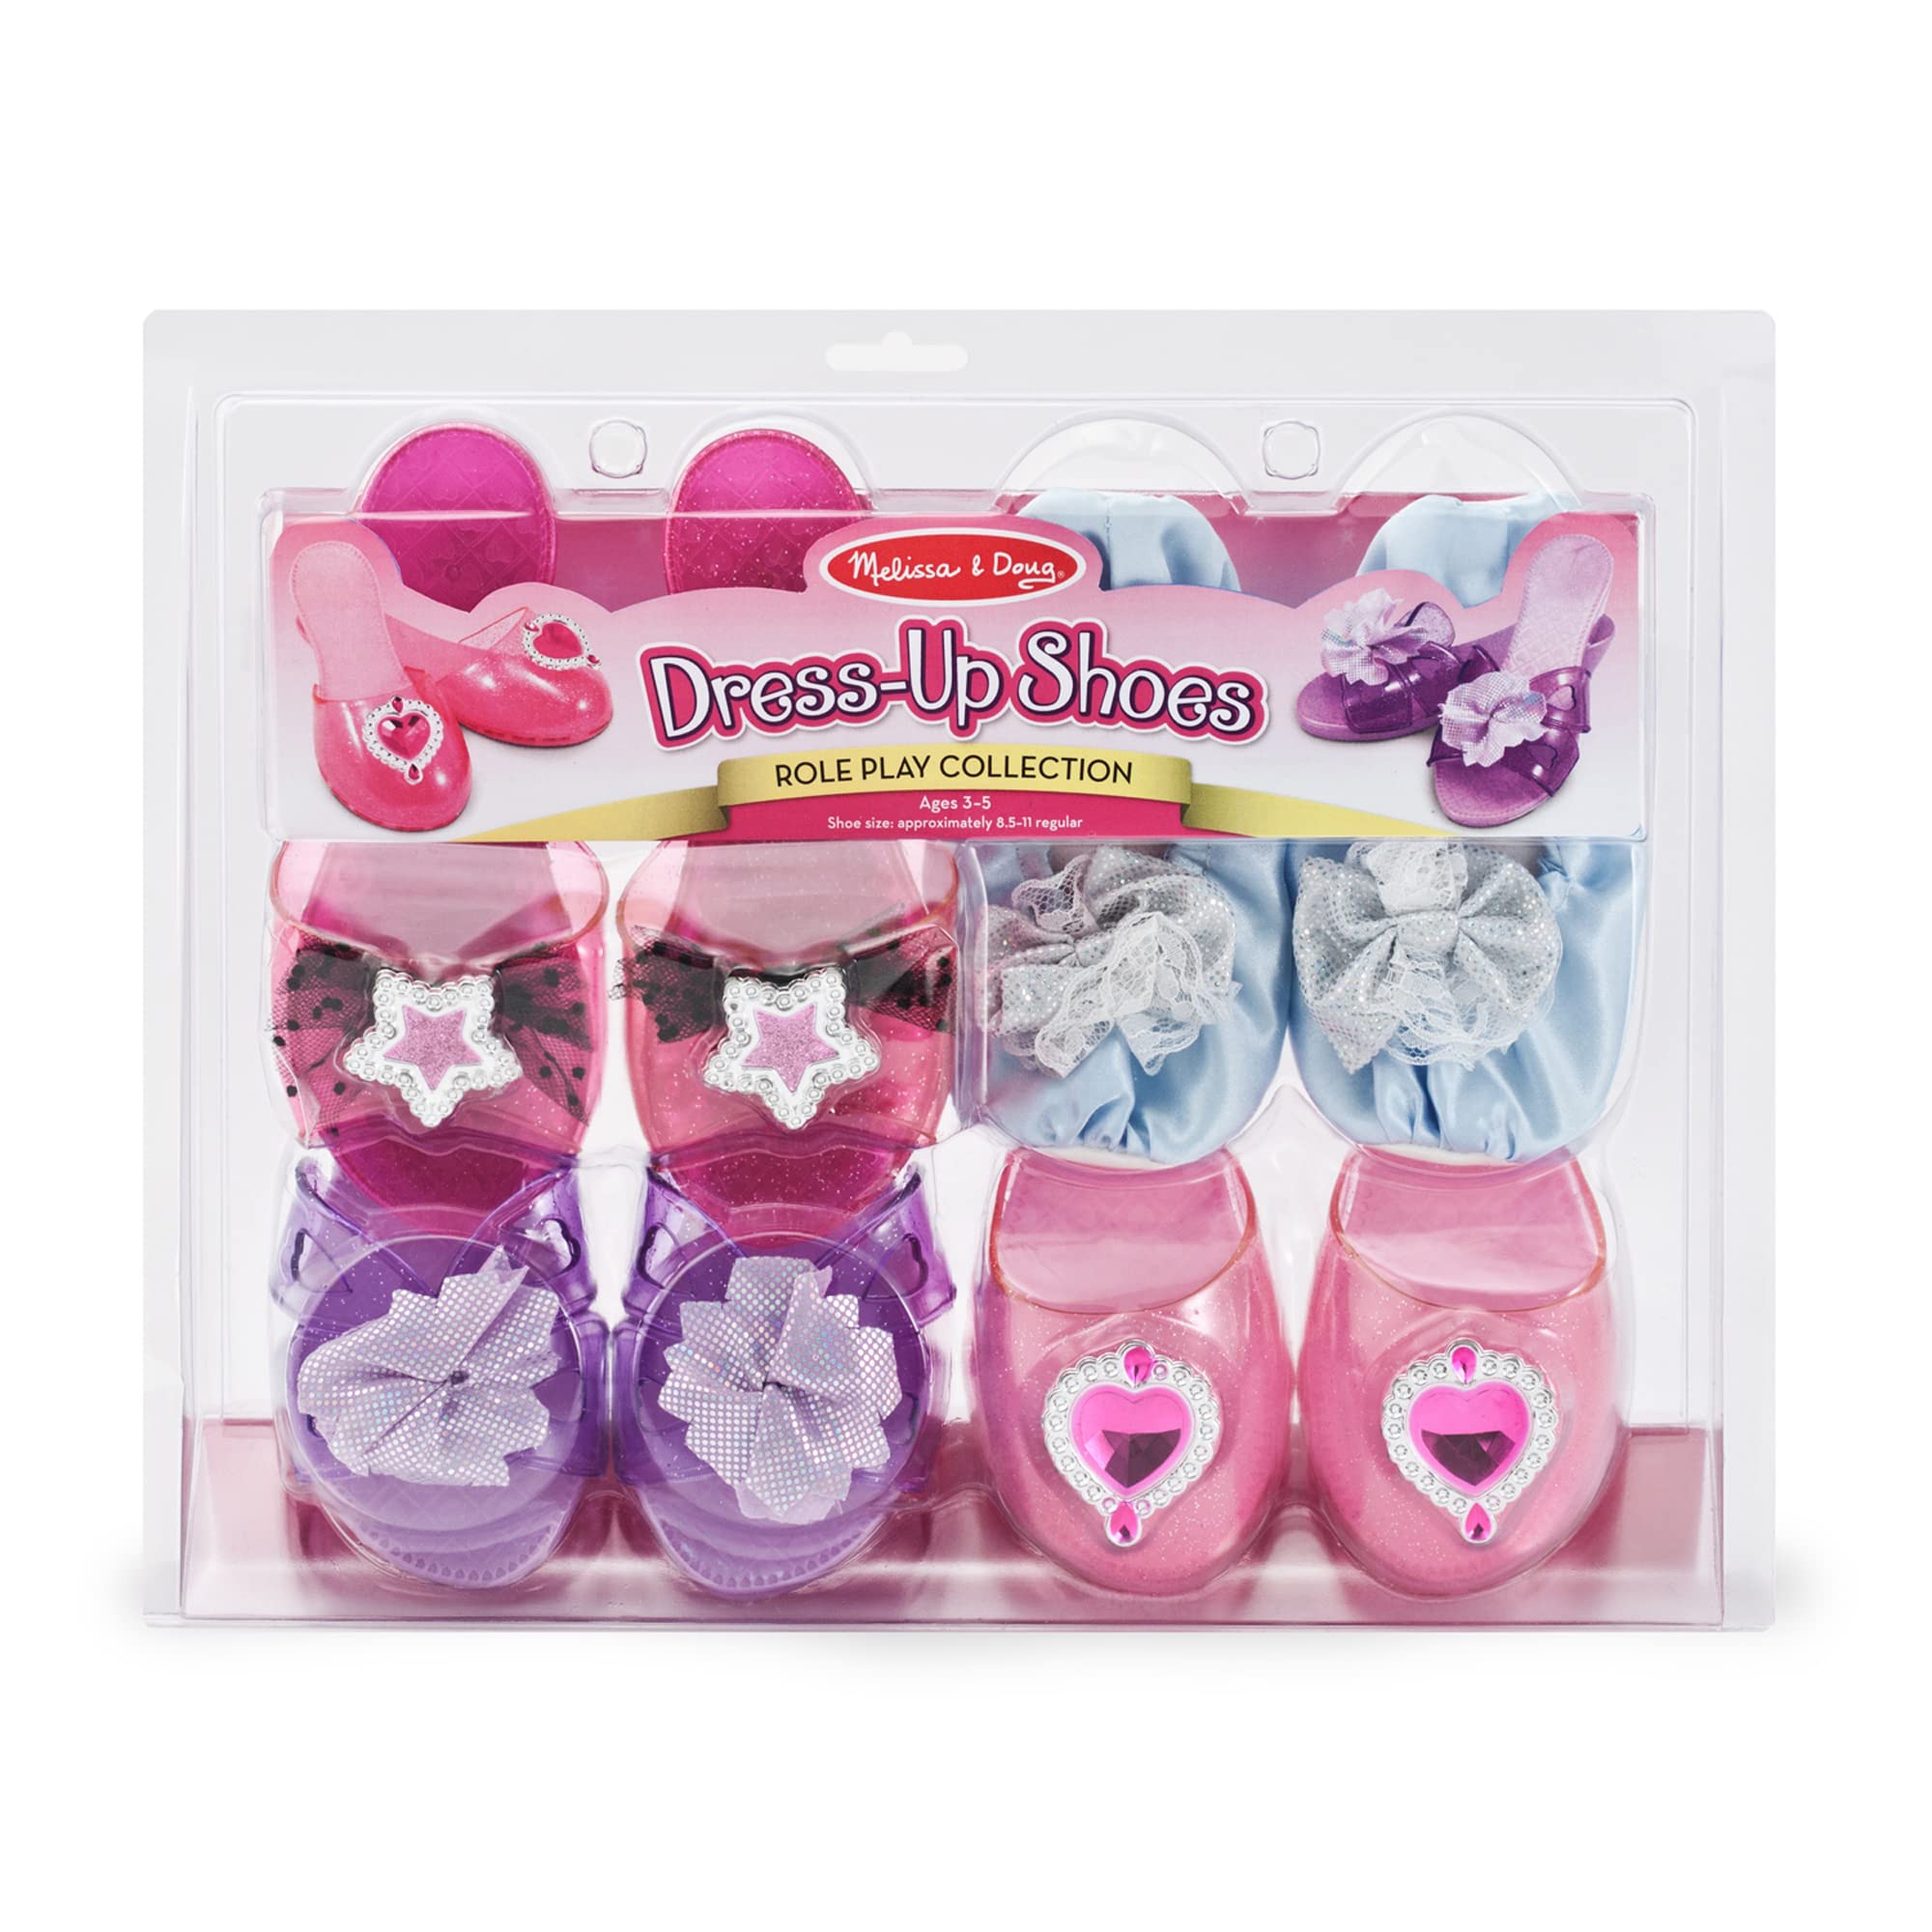 Melissa & Doug Role Play Collection - Step In Style! Dress-Up Shoes Set (4 Pairs), Multicolored, 11